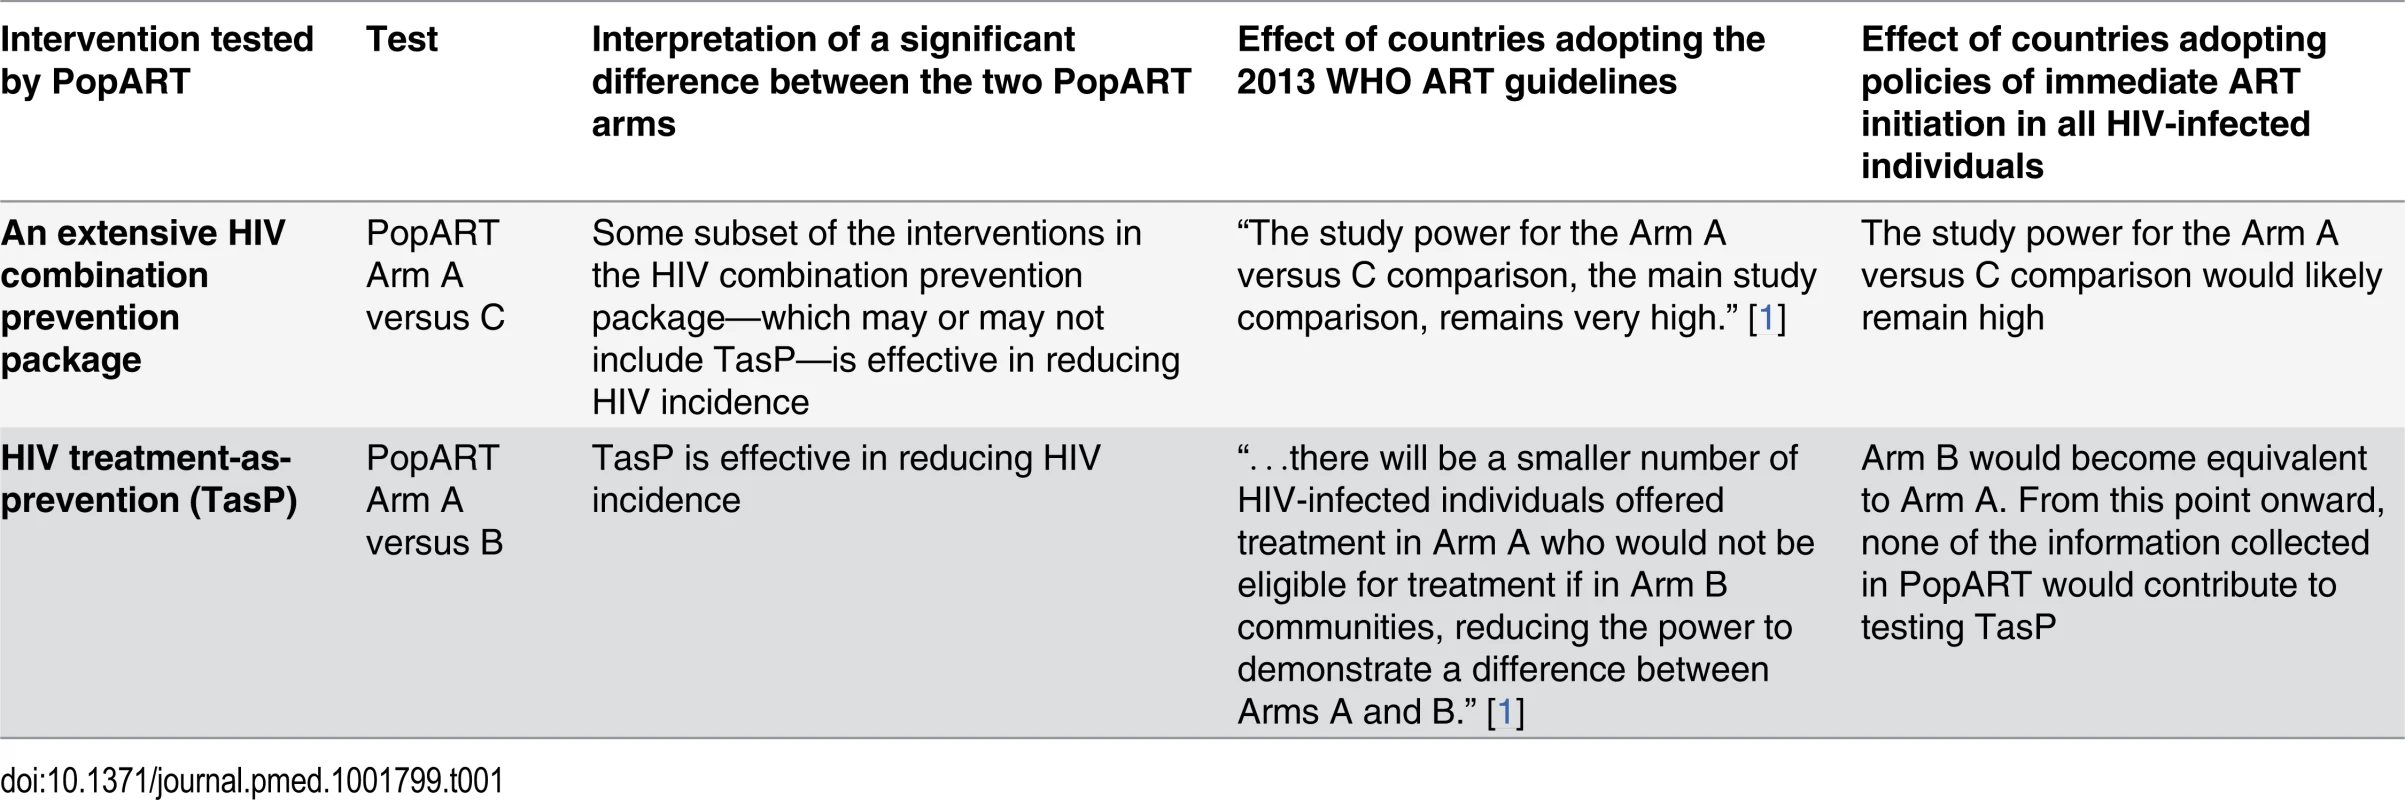 The two interventions the HPTN071 (PopART) trial aims to test.